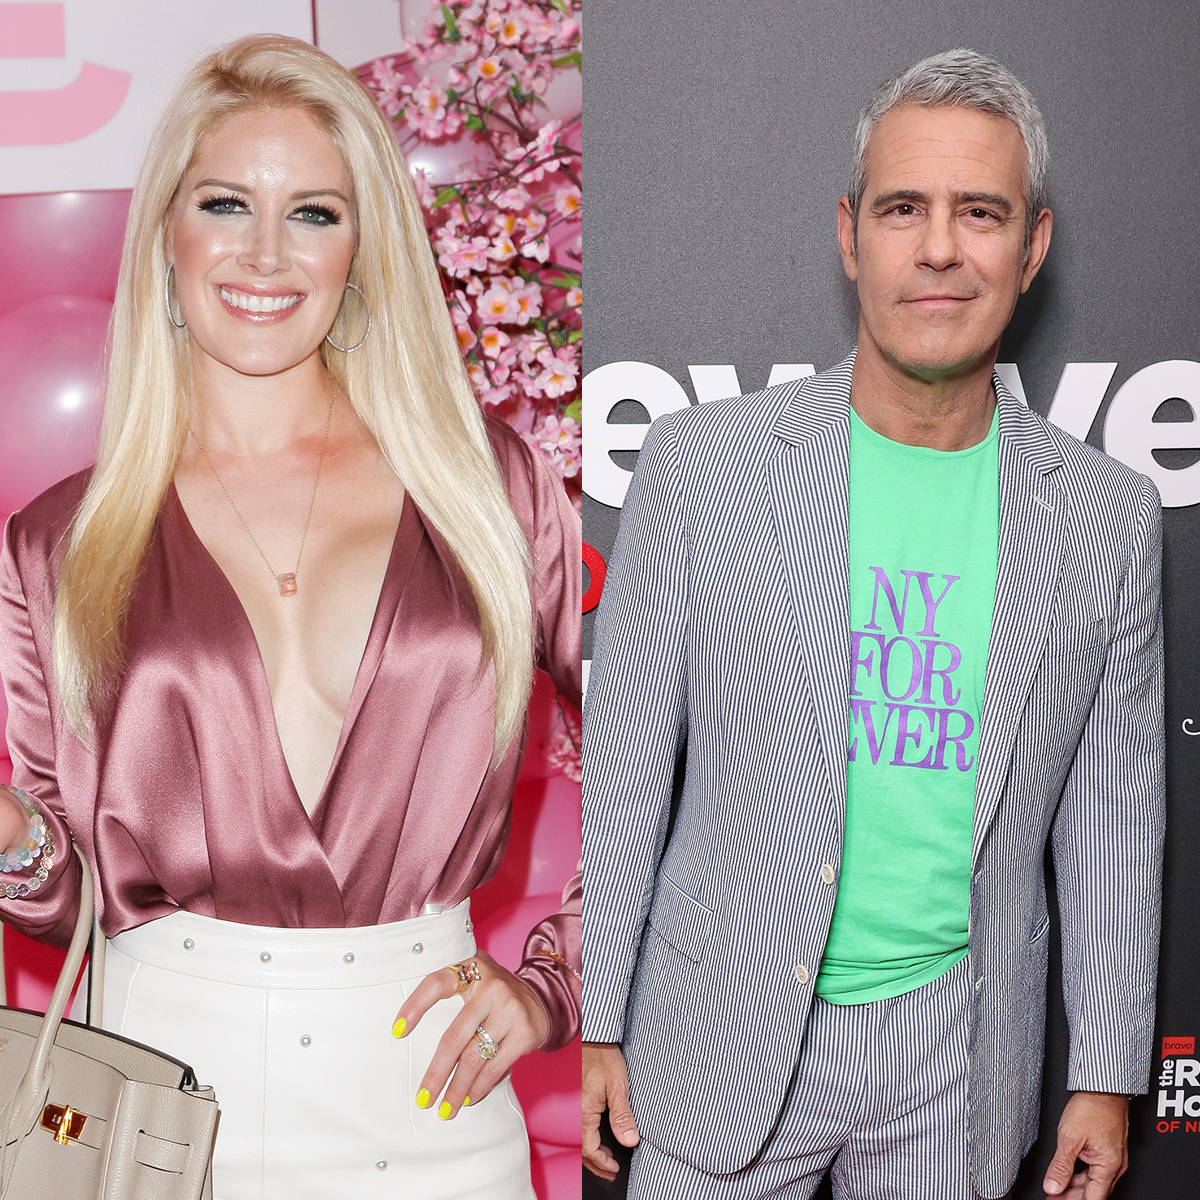 Why Isn’t Heidi Montag a Real Housewife? Andy Cohen Says…